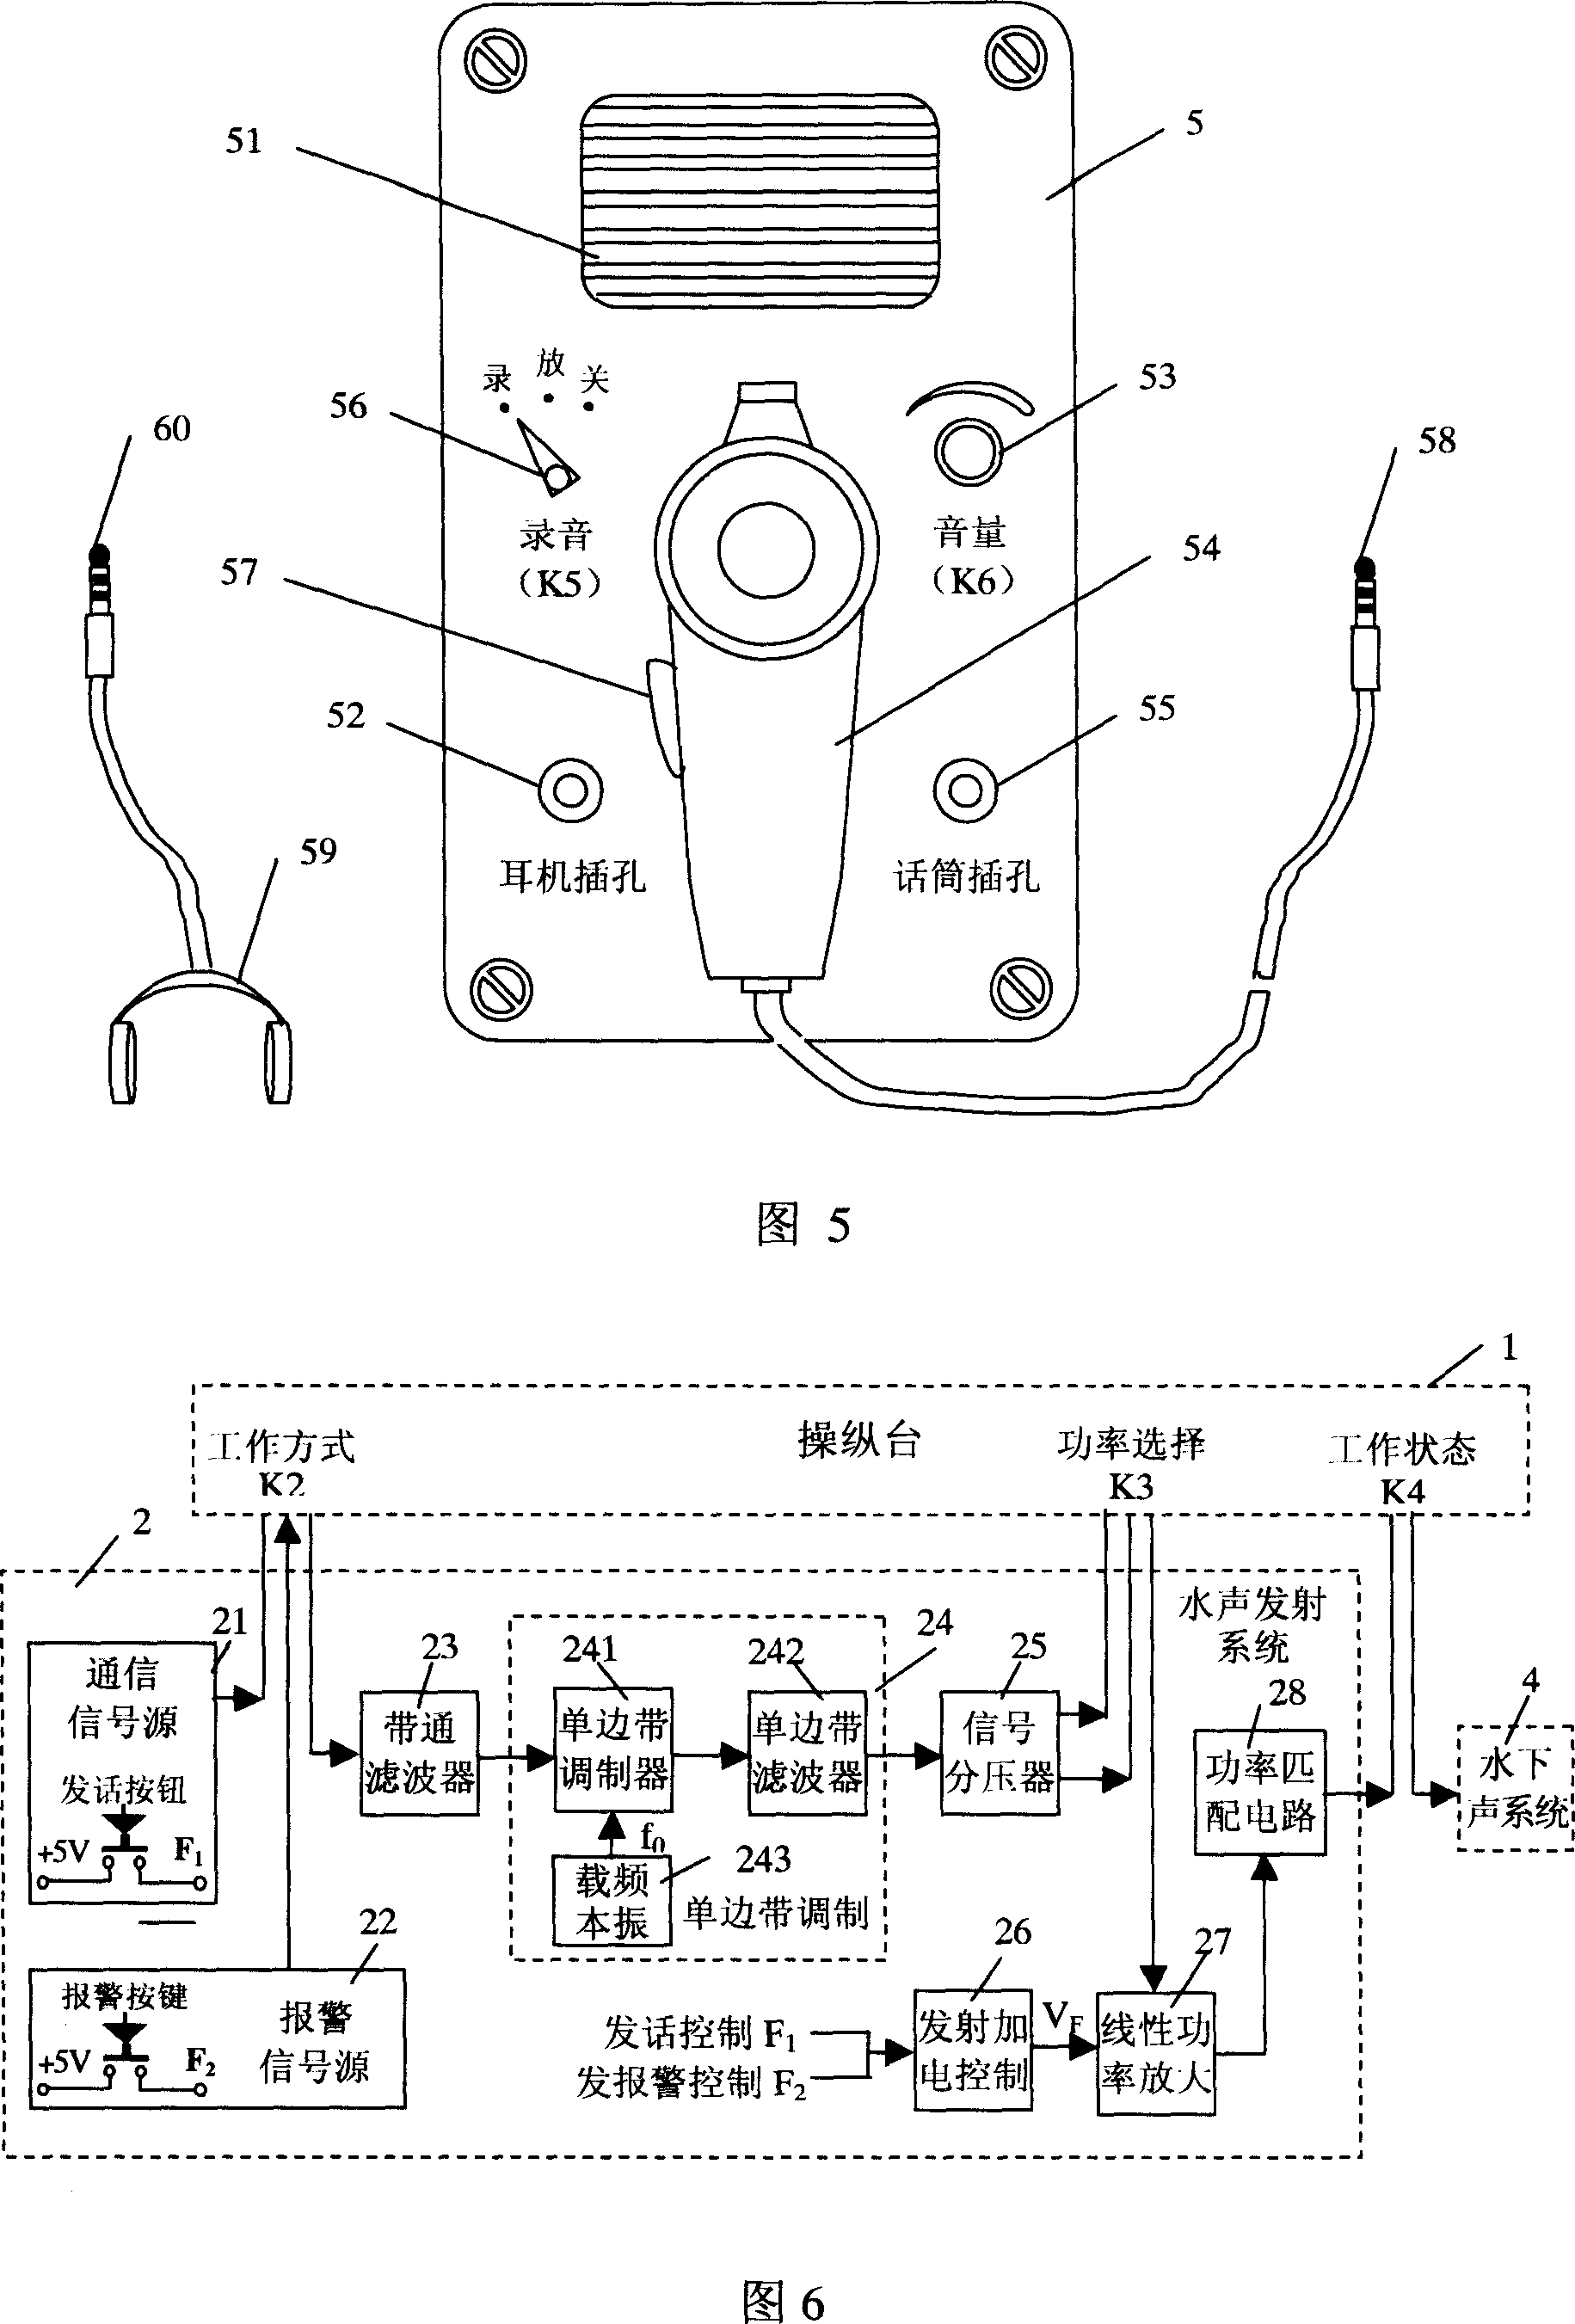 Underwater sound communications and alarming method and device